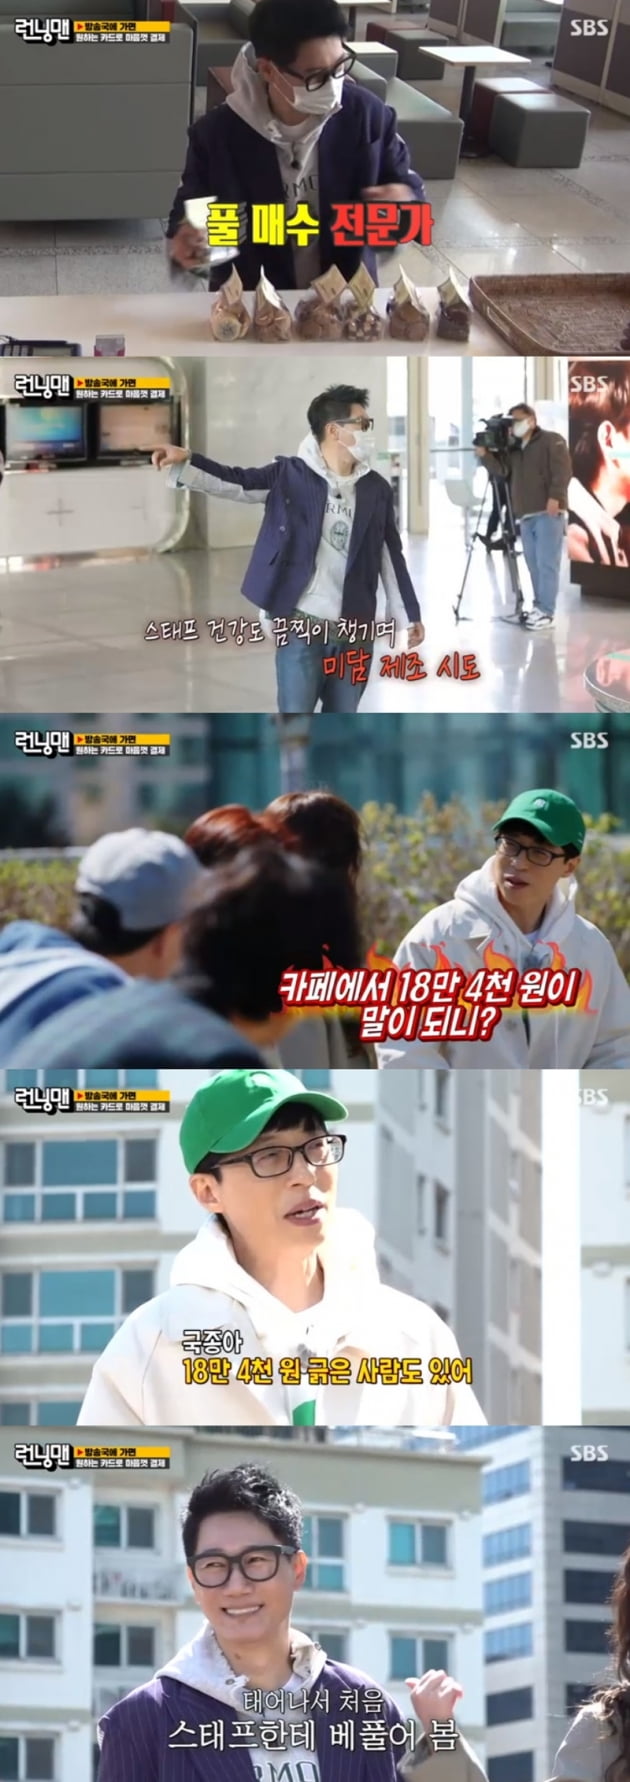 Running Man Ji Suk-jin has been a favourite with staff as a card for Yoo Jae-SukOn SBS Running Man broadcasted on the afternoon of the 9th, a special feature was drawn.The members had a card in advance, and each member was able to choose one of the card of each other.Lee Kwang-soo said, Kim Jong-kook is good for his juniors. He does not like it. He bought his coffee and cookies.Ji Suk-jin then picked out Yoo Jae-Suks Card and spent a whopping 184,000 won at the cafe; presenting juice and cookies to the staff.Kim Jong-kook came in, and when I saw the card history on the text, he said, What did you write so much here? What is there to buy more than 10,000 won?Im not going to eat it, but its a title; cookies are a title in the morning, he said.Yoo Jae-Suk pointed out Ji Suk-jins payment, saying, Some people scratched 184,000 won, and he is not a good person to use.a fairy tale that children and adults hear togetherstar behind photoℑat the same time as the latest issue